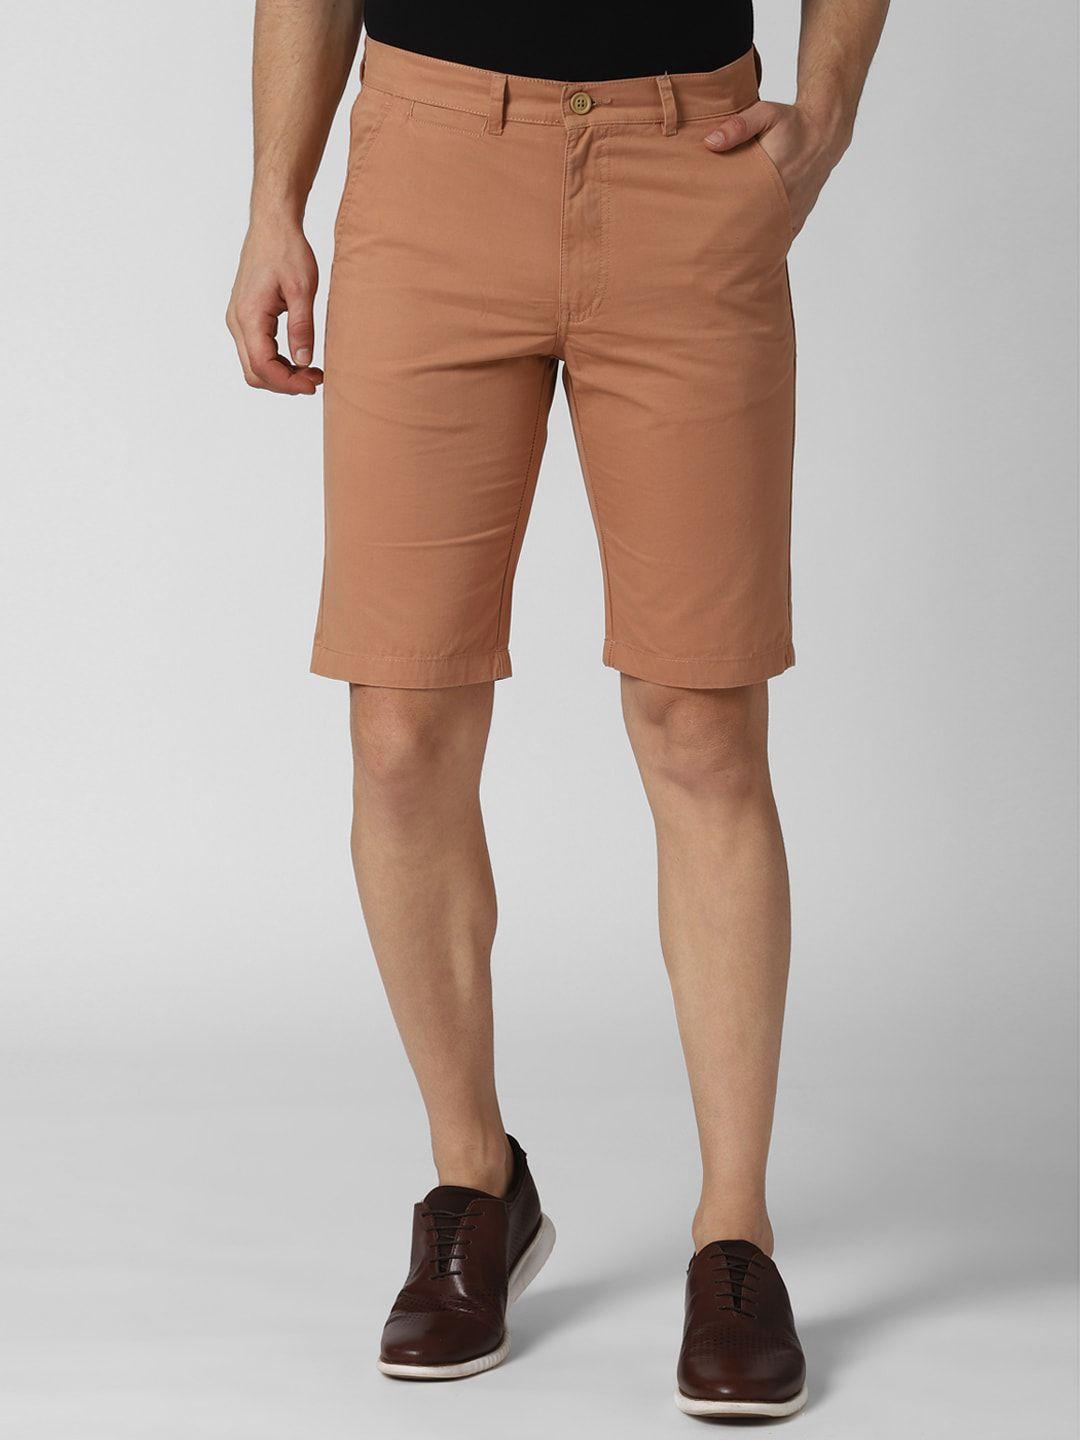 peter-england-casuals-men-peach-coloured-solid-regular-fit-shorts